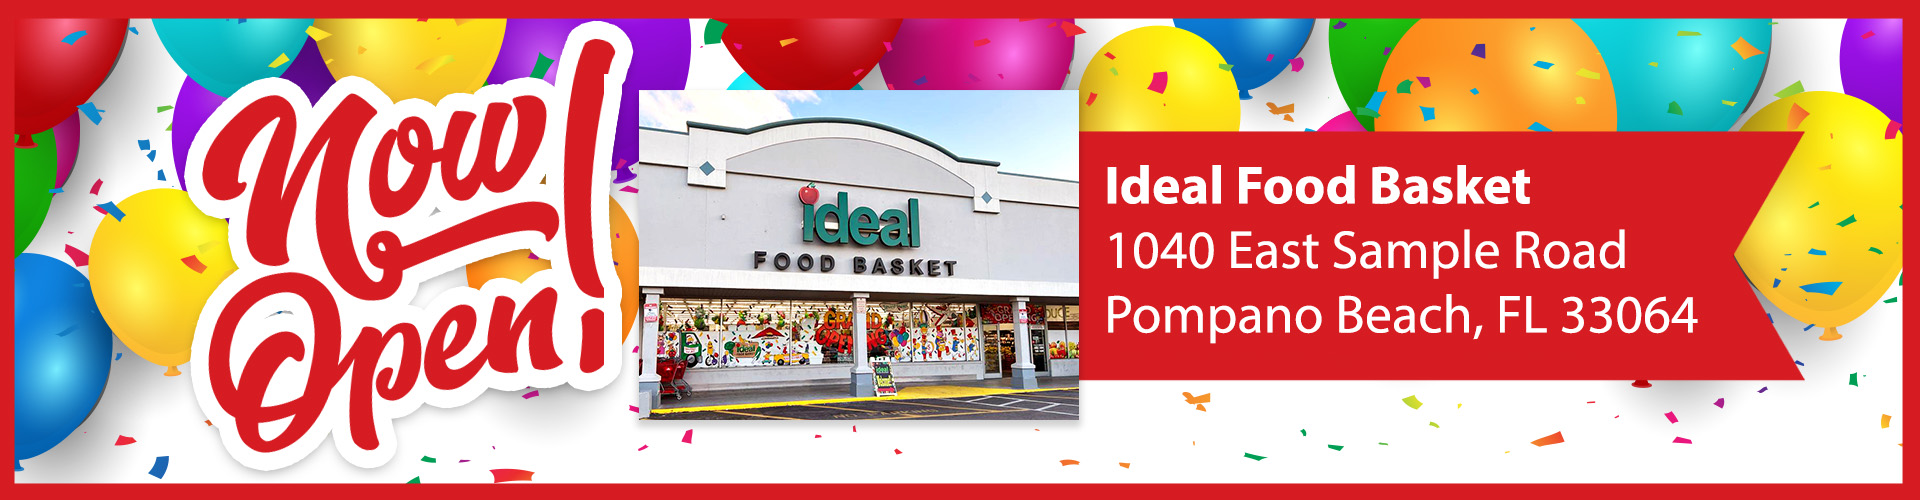 Now Open! Ideal Food Basket 1040 East Sample Road Pompano Beach Florida 33064 Get Directions to Location